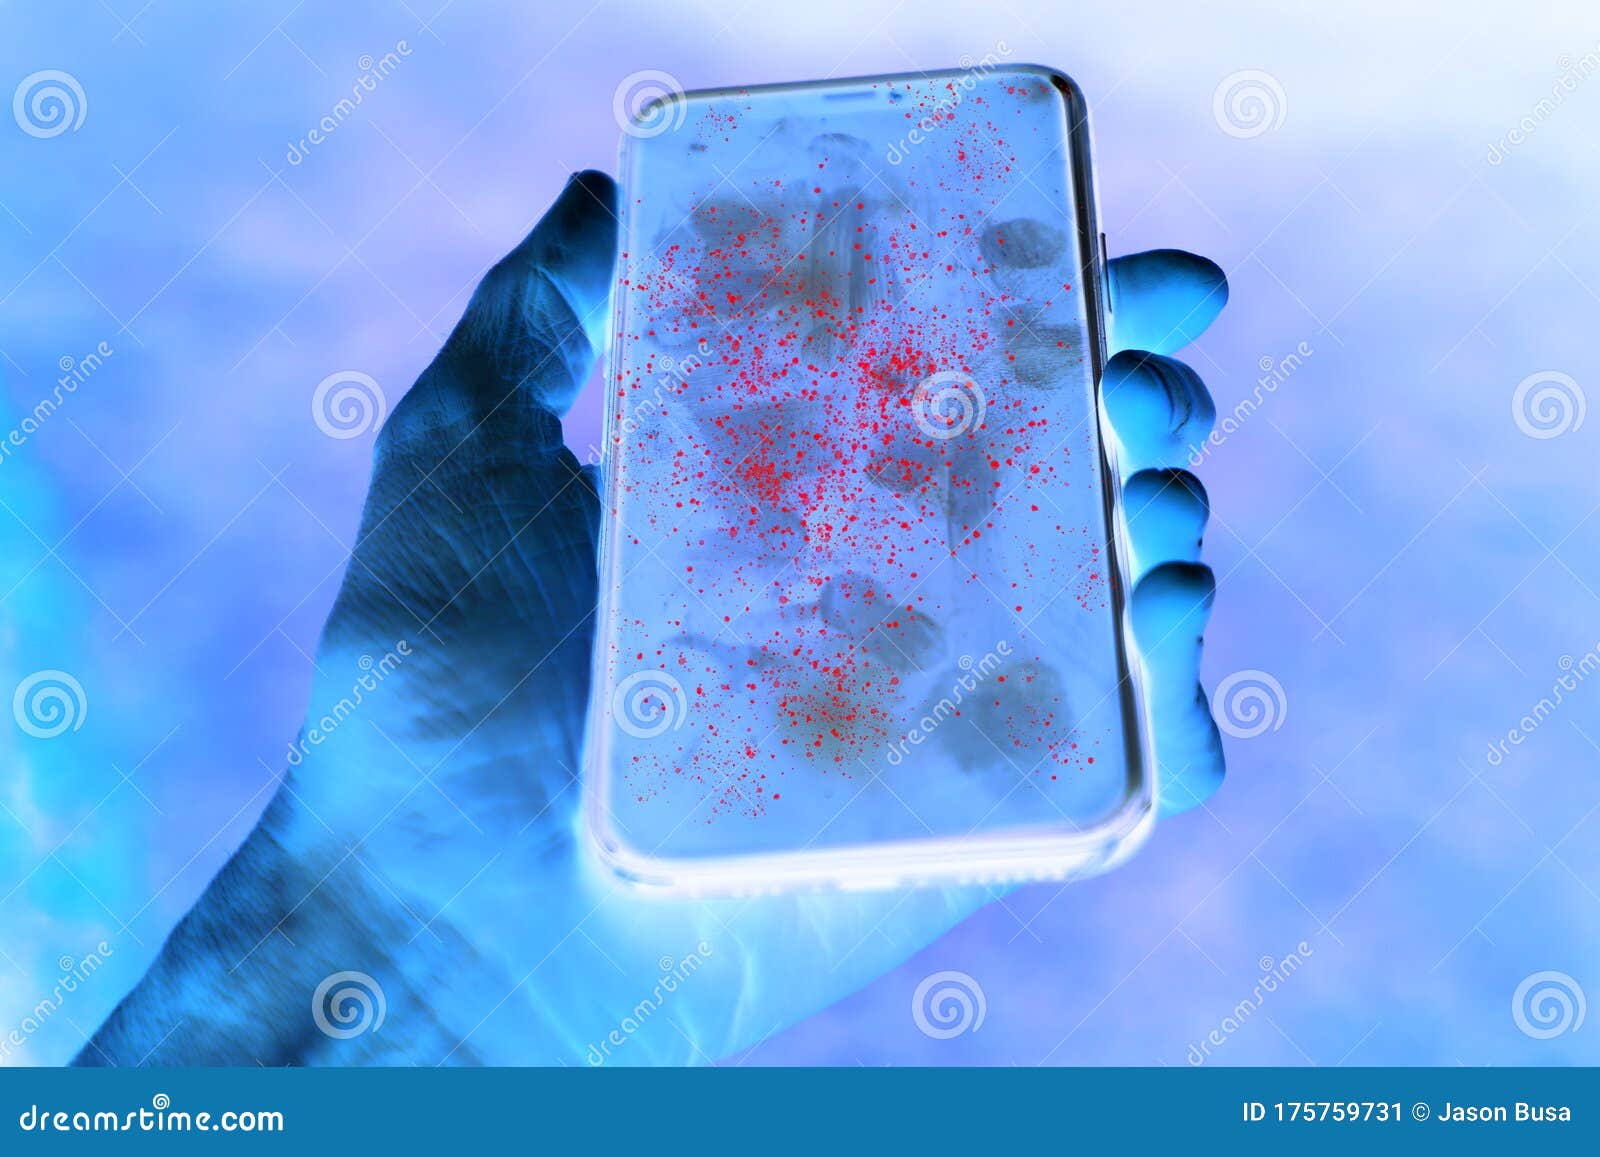 dirty phone screen with invisible germs shown in contrast